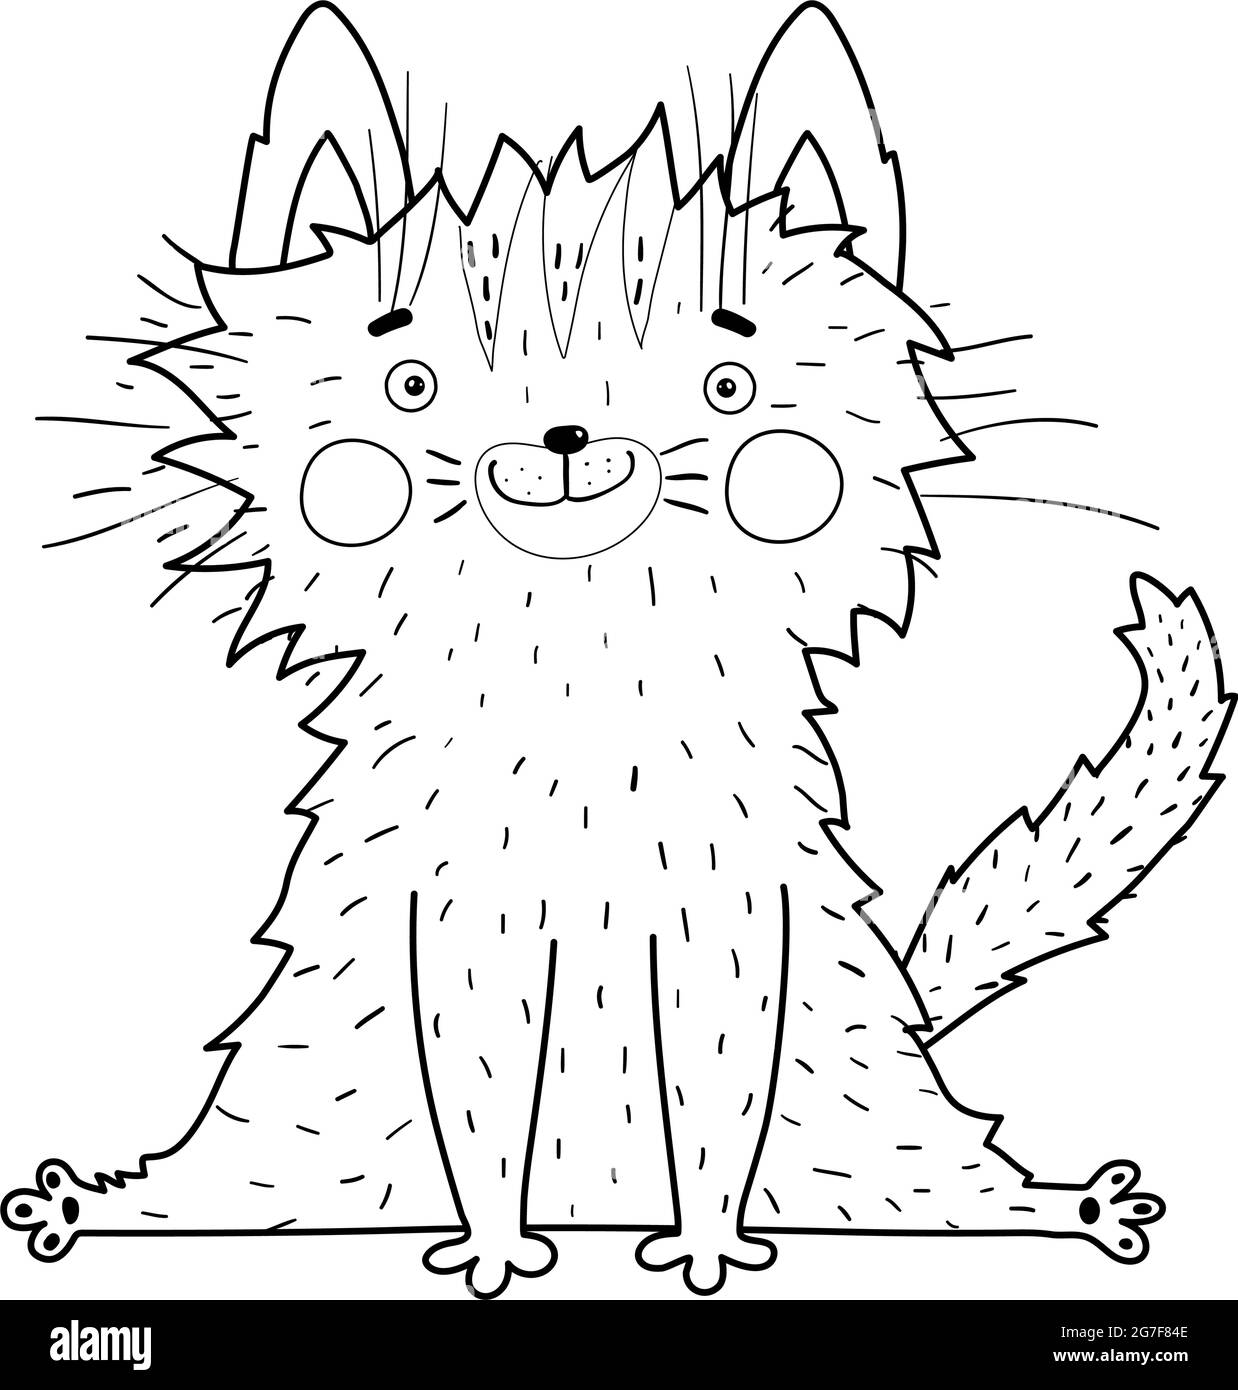 Cute Cat or Kitten Outline Coloring Book Page Stock Vector